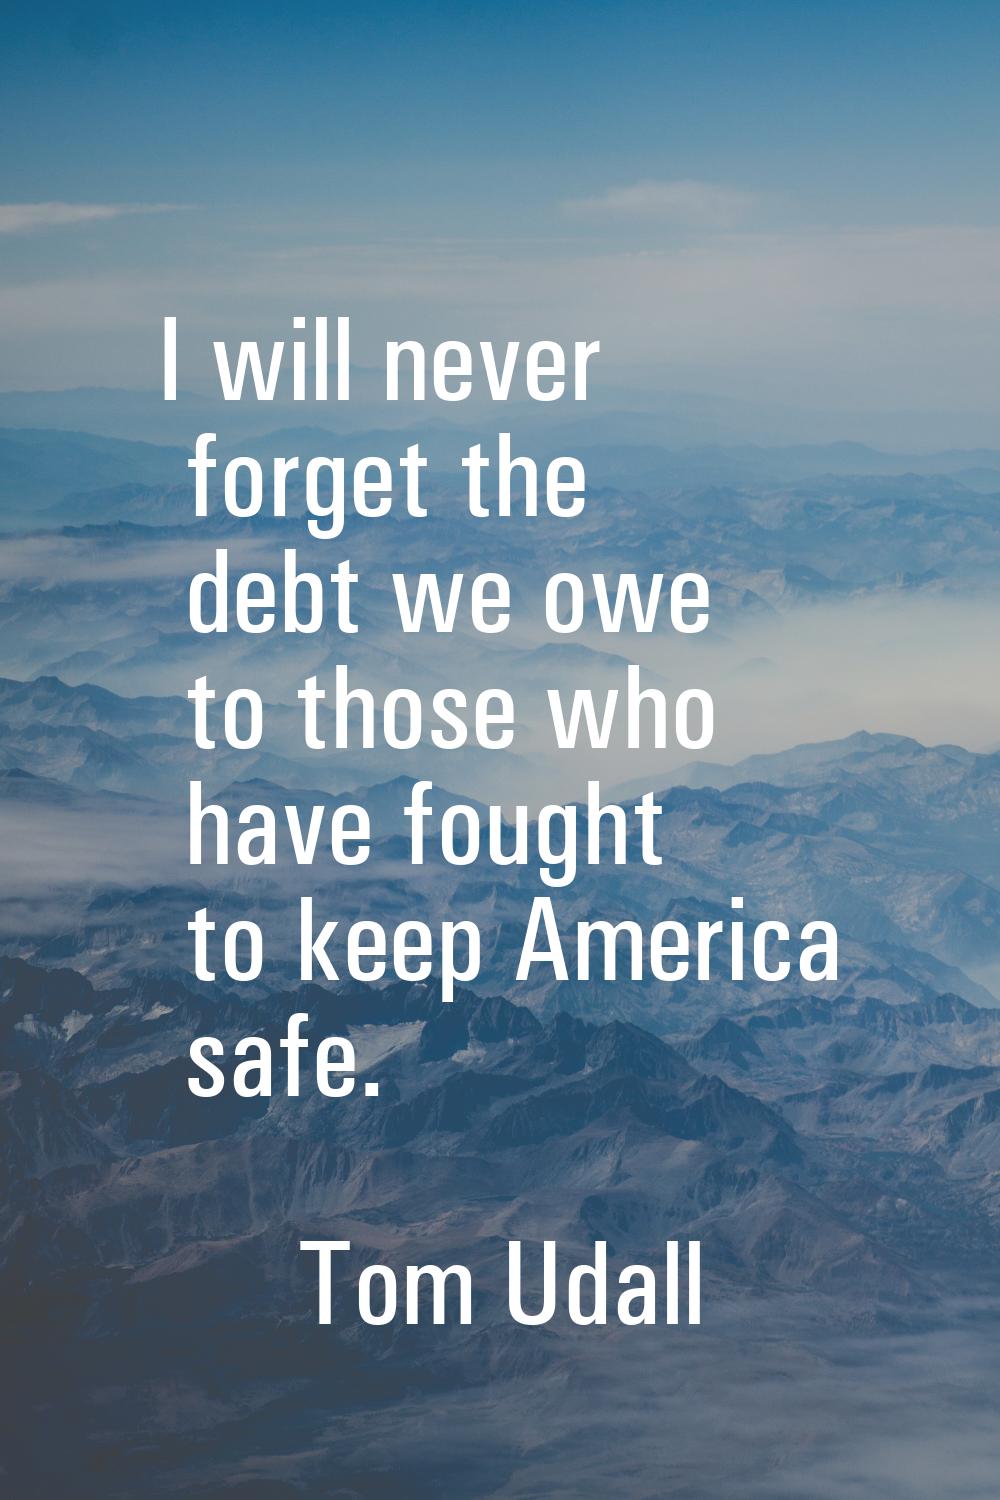 I will never forget the debt we owe to those who have fought to keep America safe.